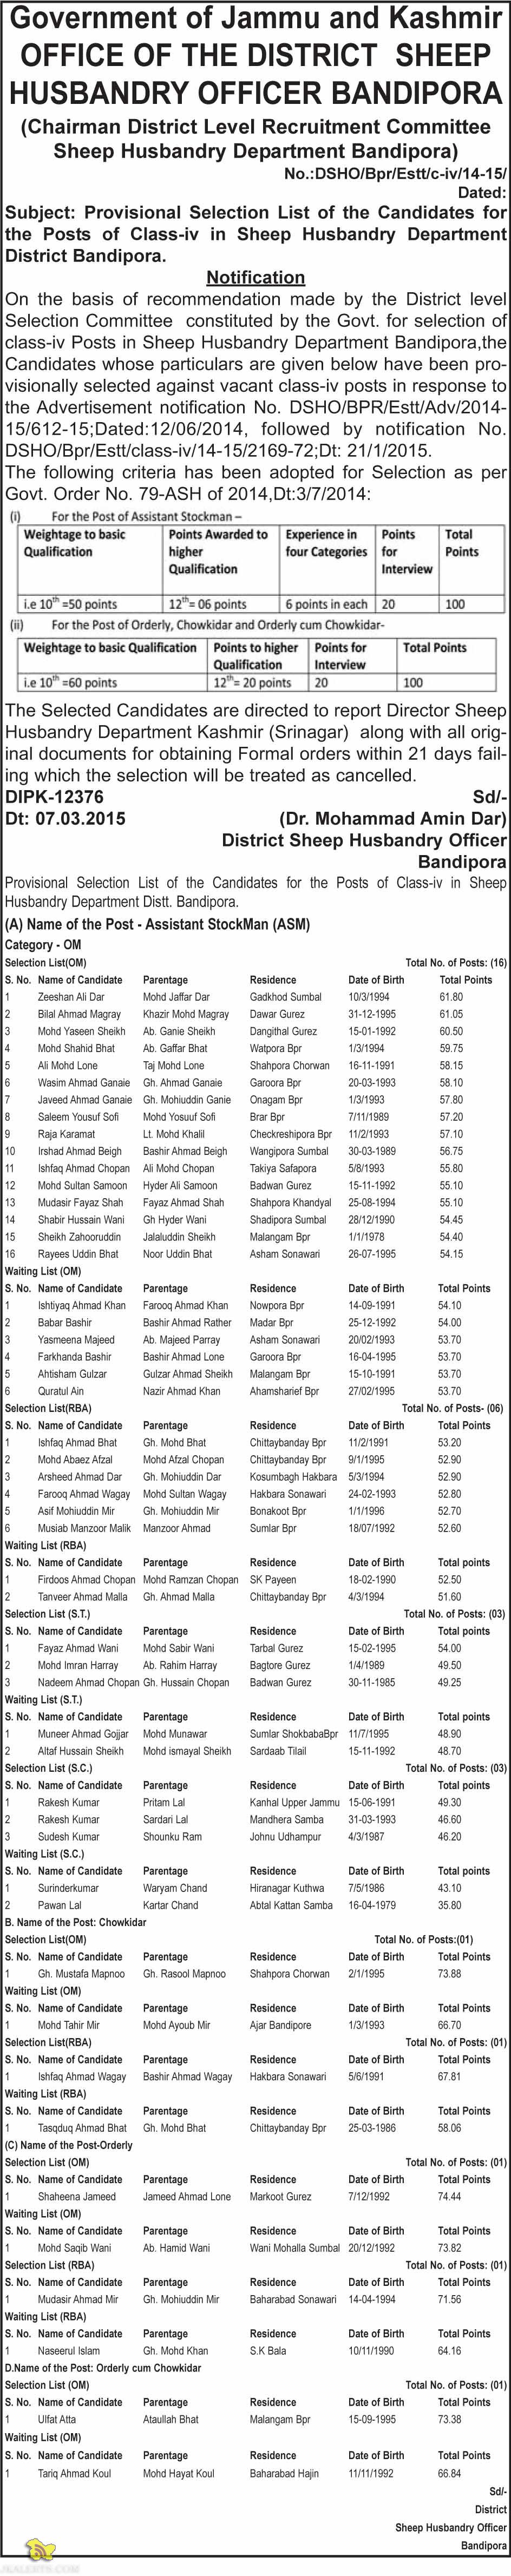 Selection List Posts of Class-IV in Sheep Husbandry Department Bandipora.